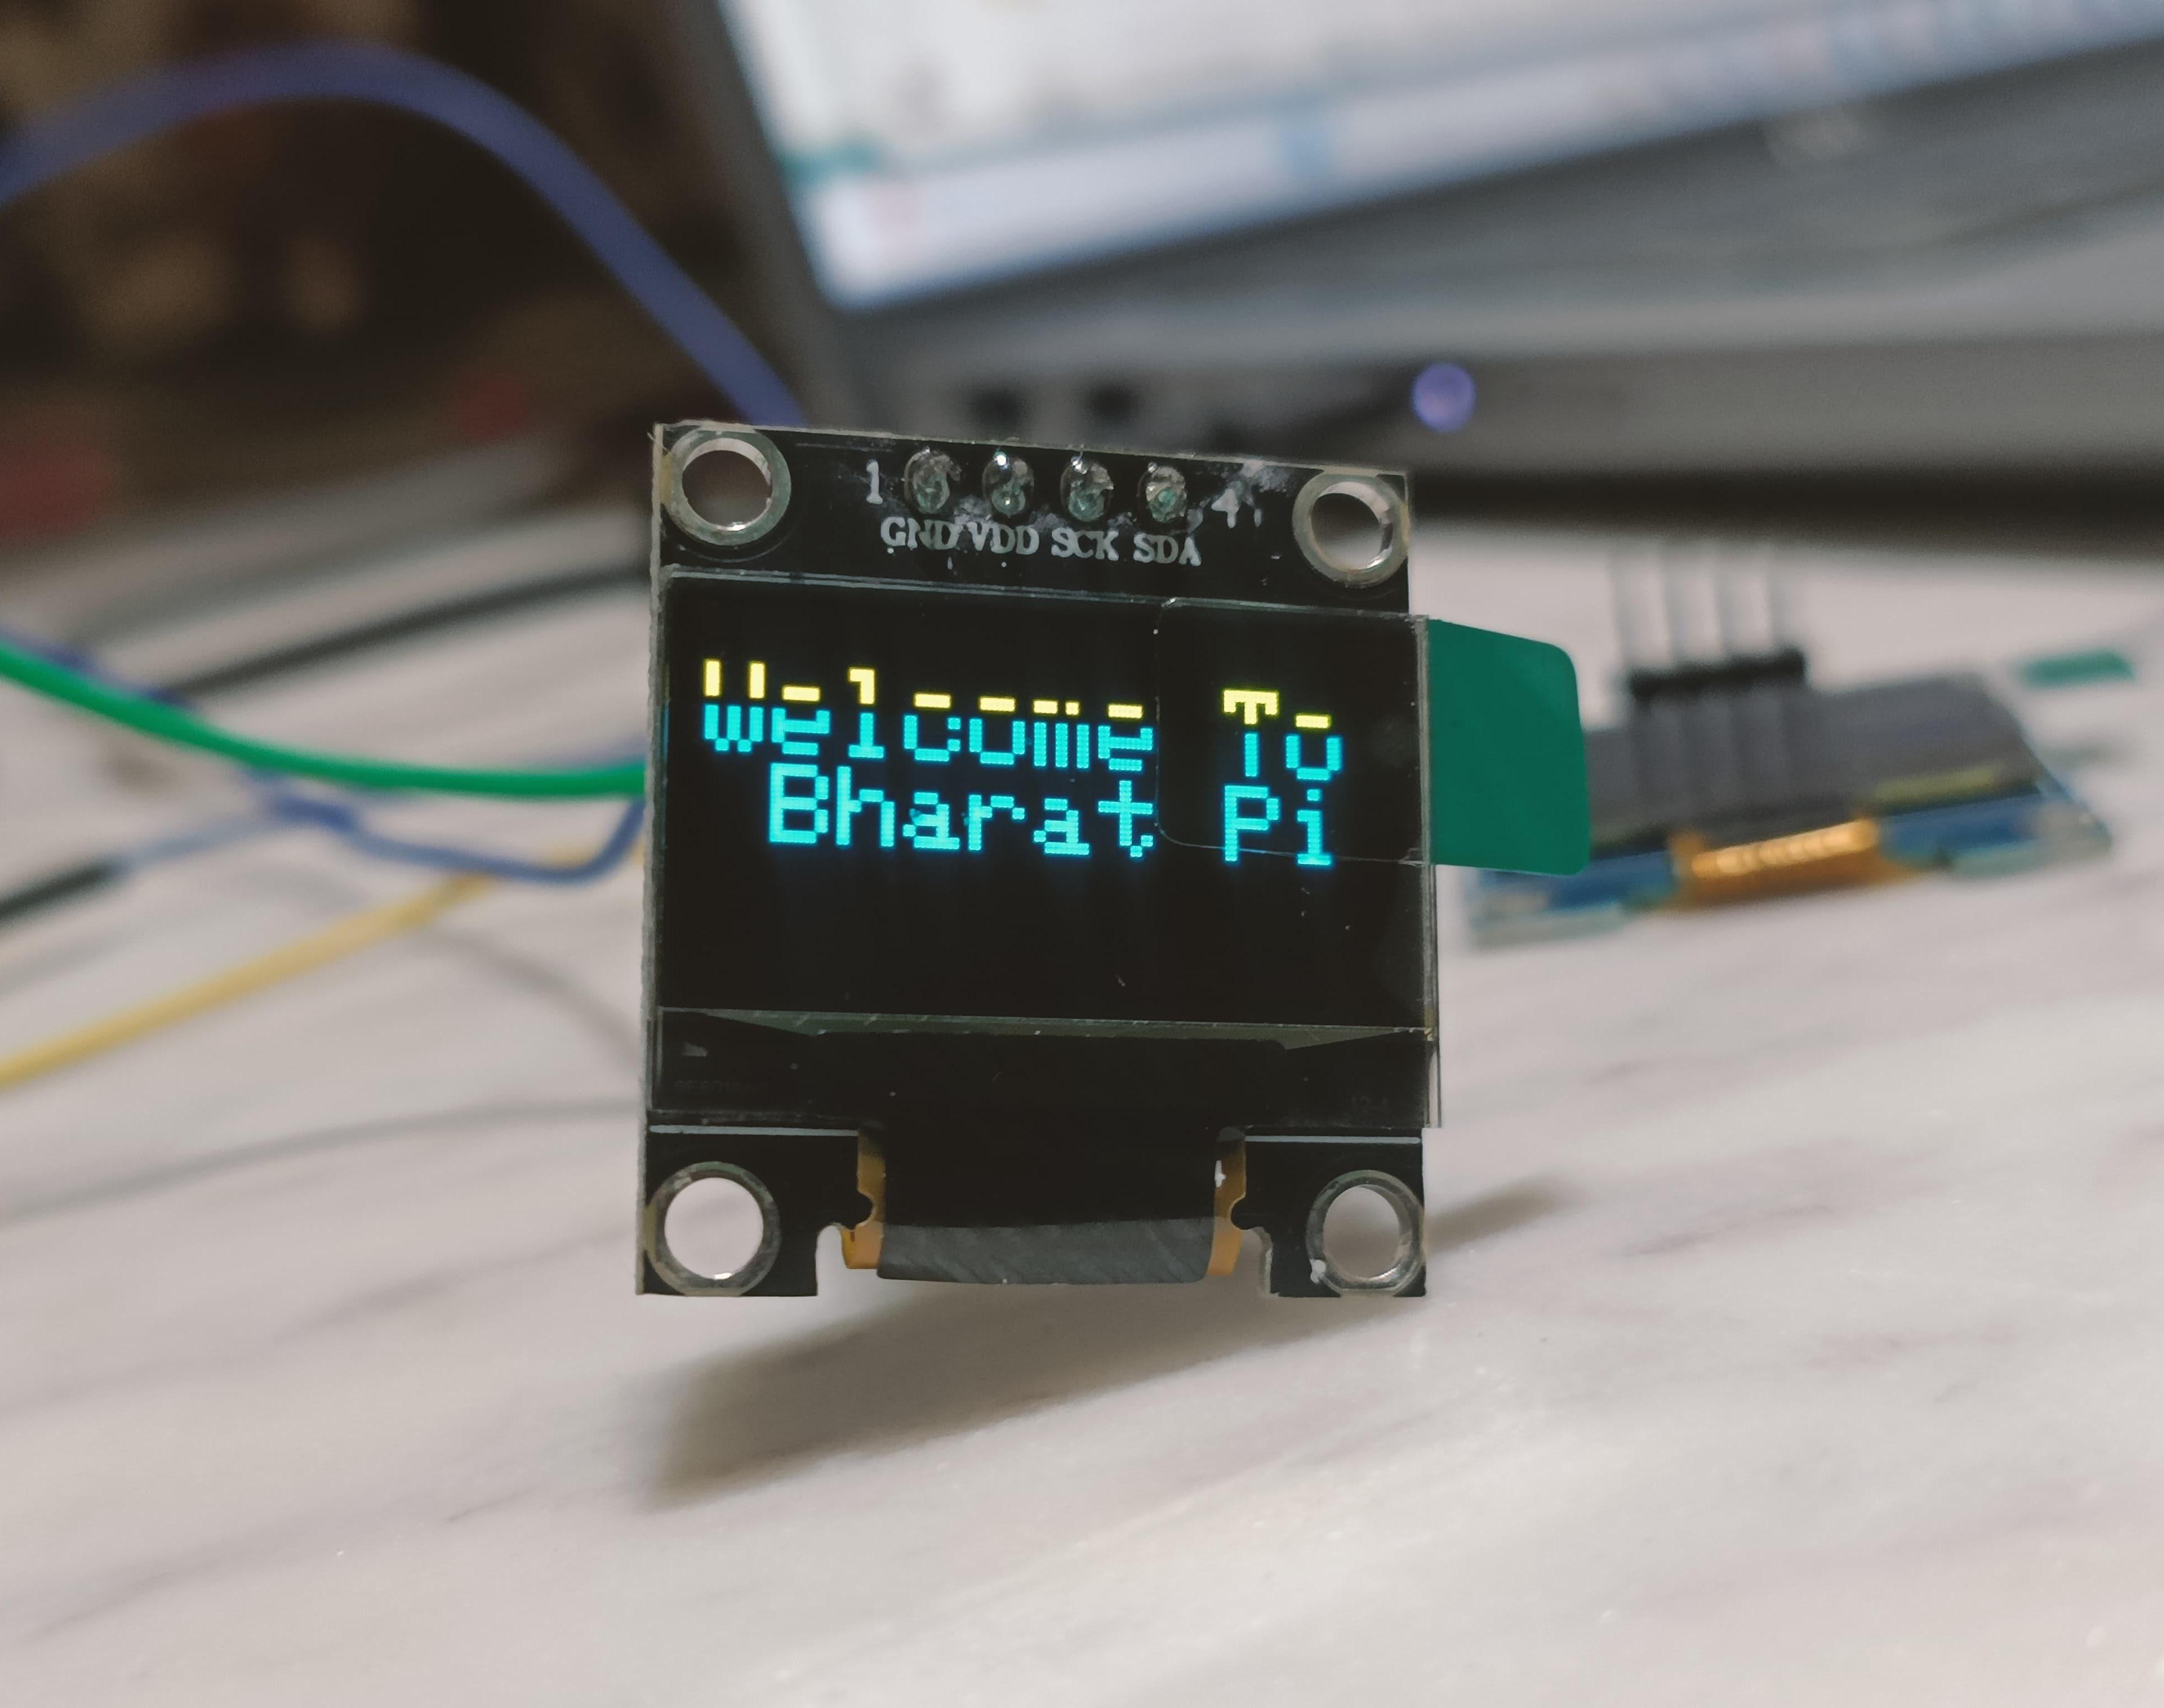 Guide for I2C OLED Display With Bharat Pi